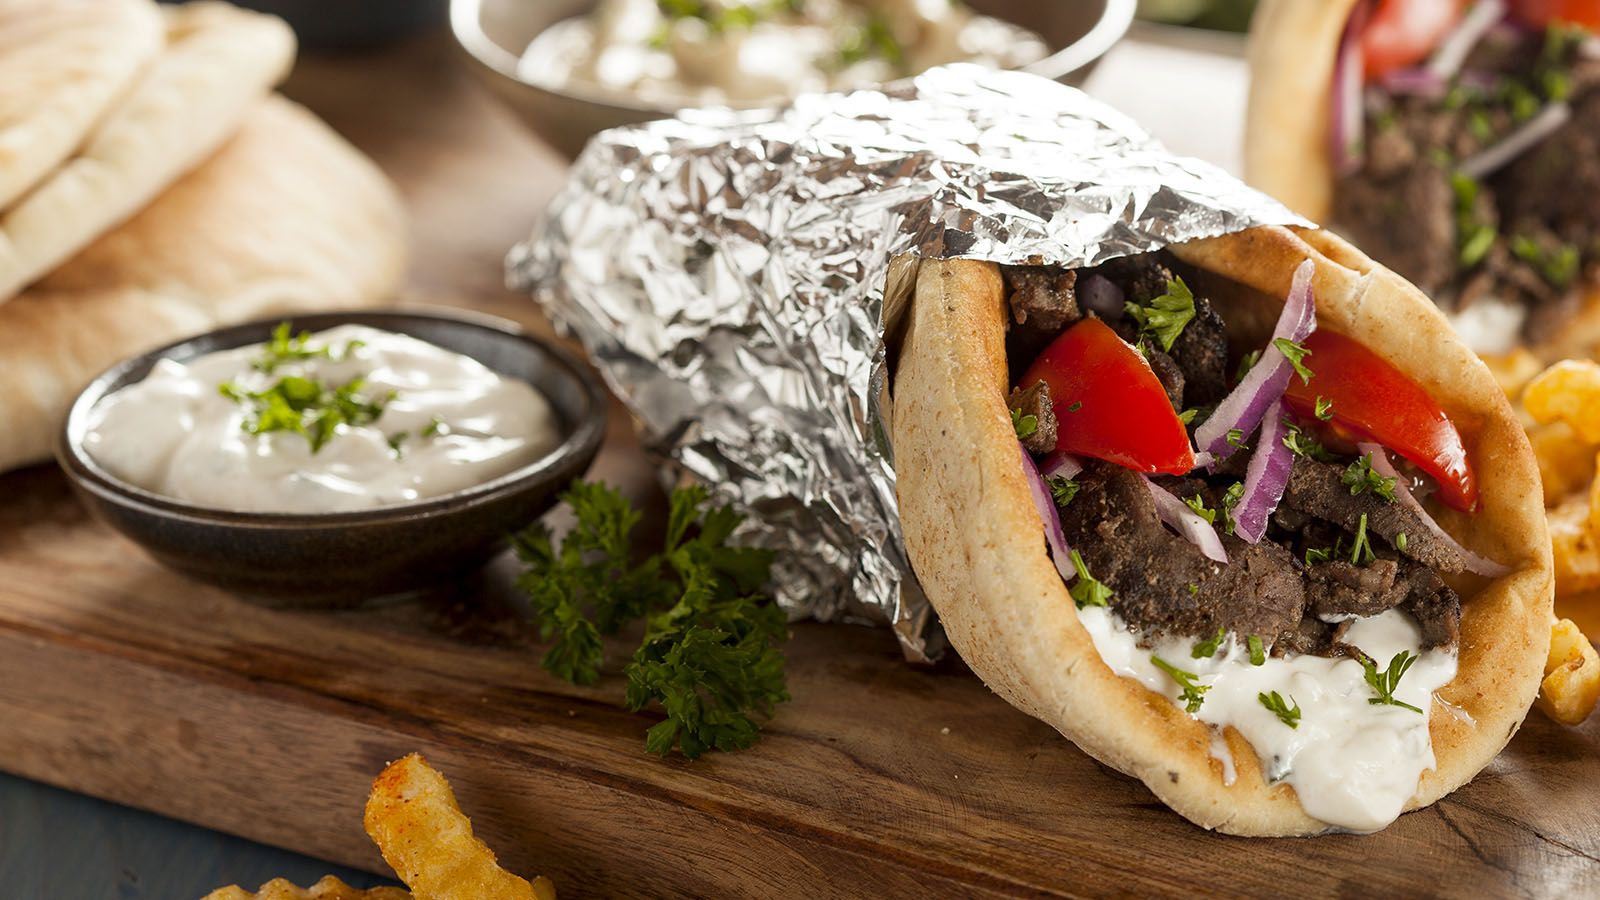 A new spot to grab a gyro will soon join the Fort Wayne scene.